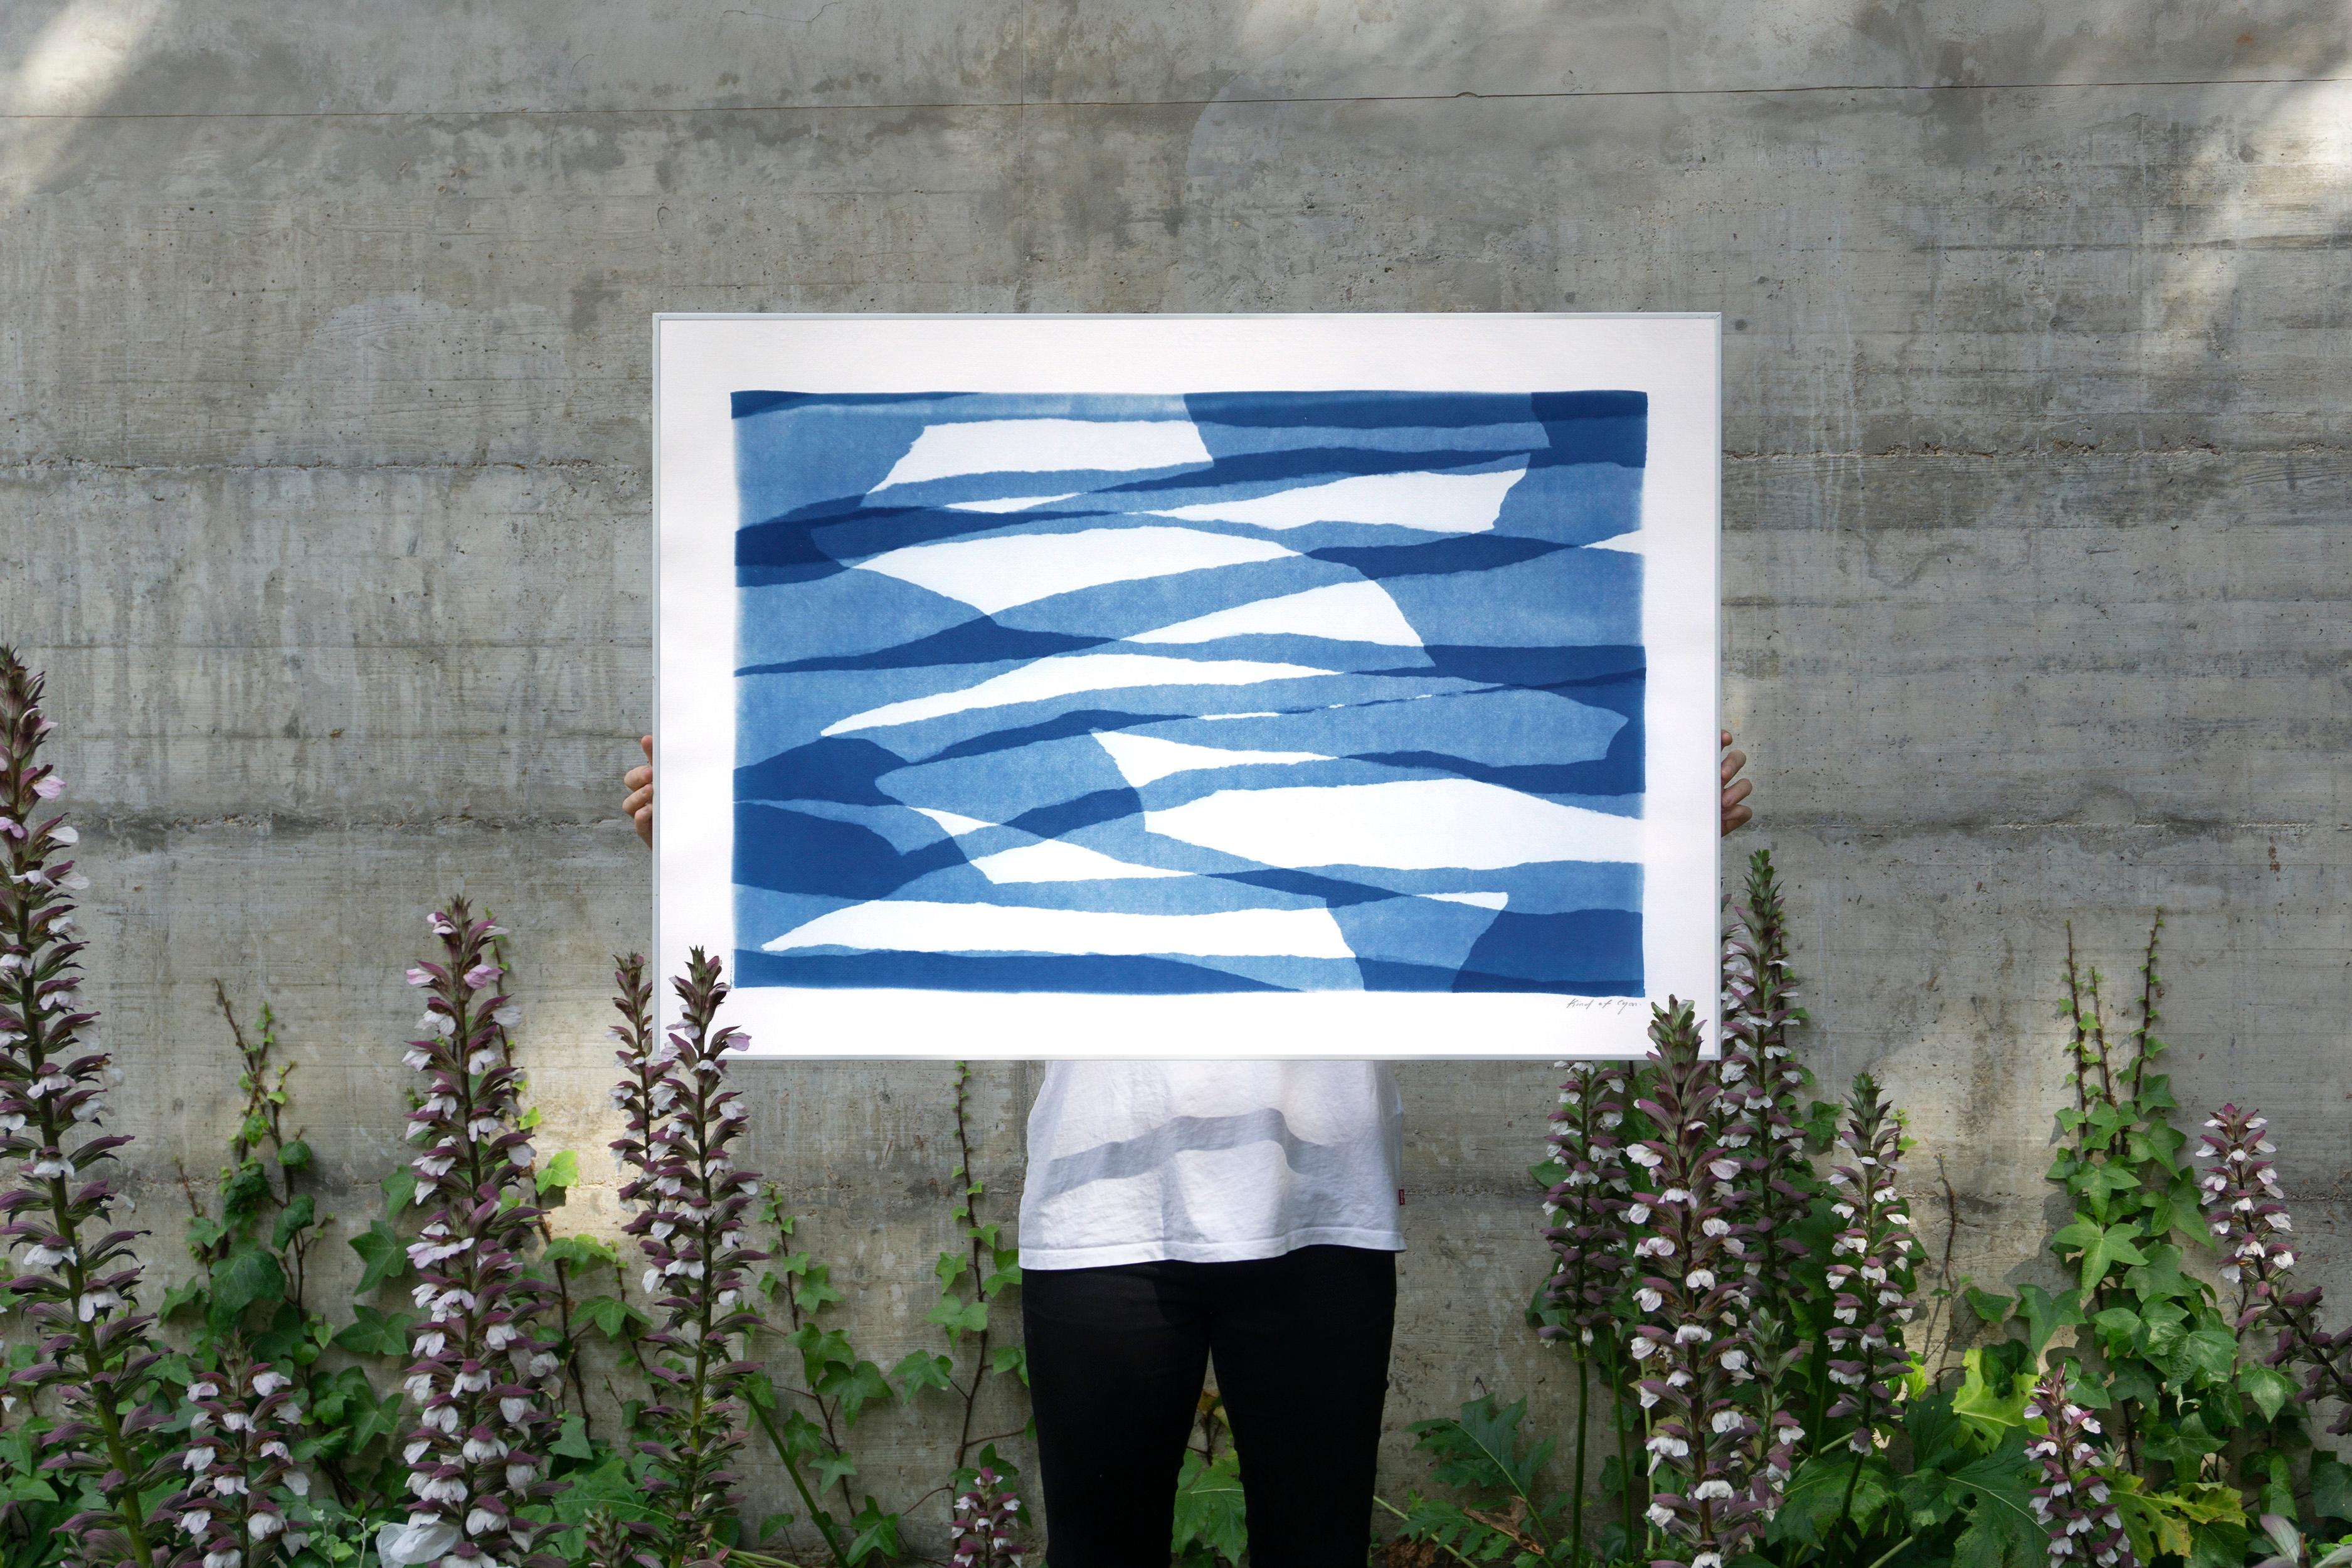 Unique Monotype in Blue Tones, Layers of Torn Paper, Horizontal Abstract Shapes - Print by Kind of Cyan